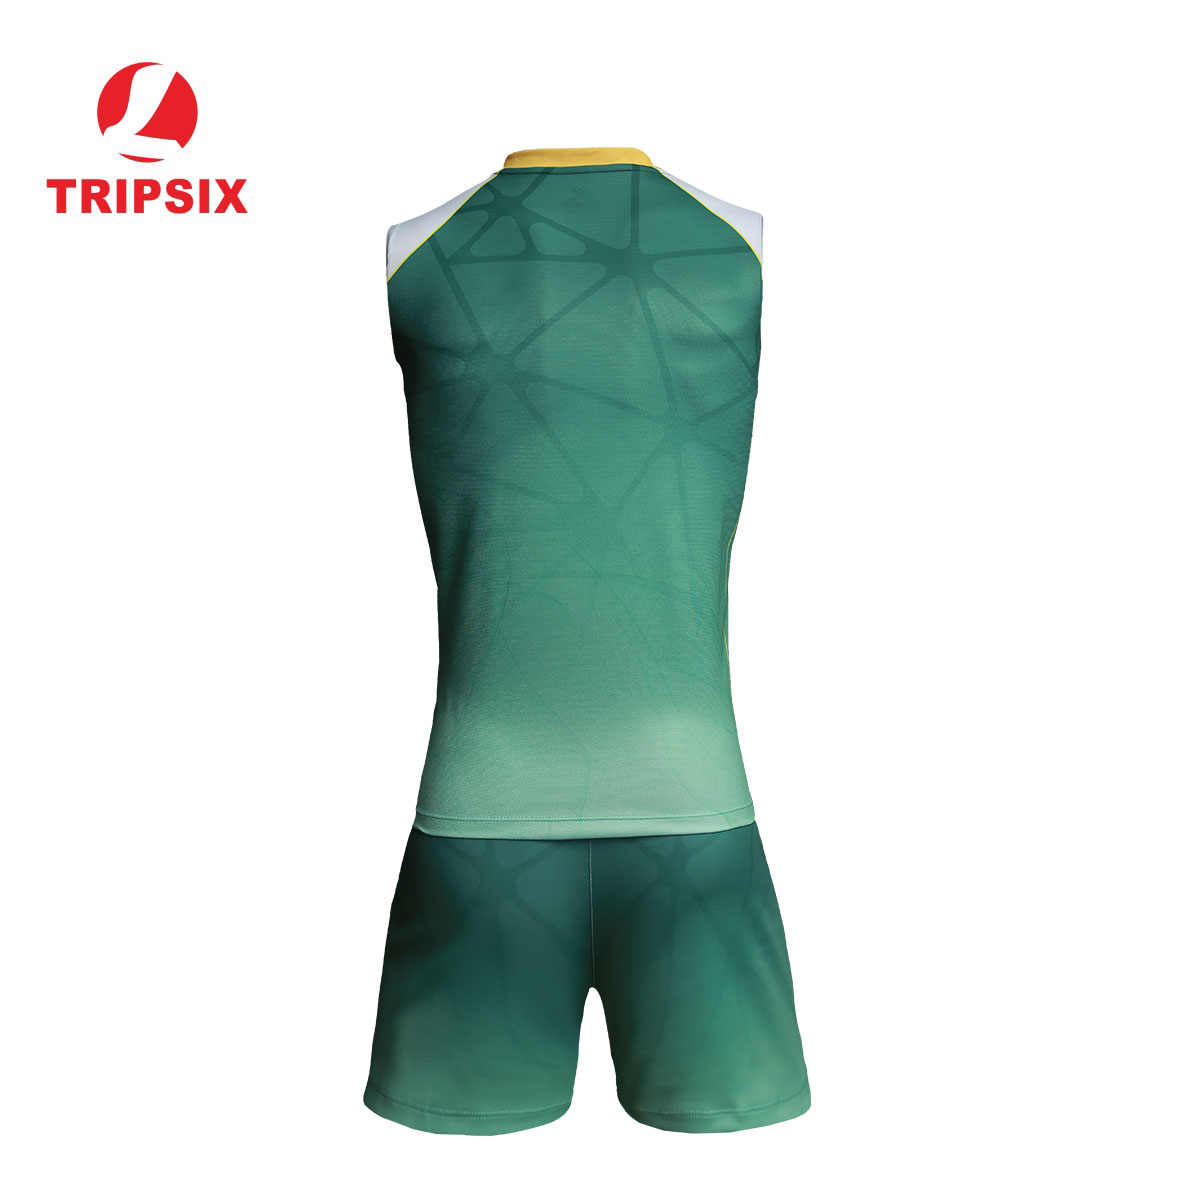 To meet ever-changing market demand, TRIPSIX is trying to lead innovation wherever possible. #customvolleyballjerseys #youthvolleyballuniforms #volleyballuniforms